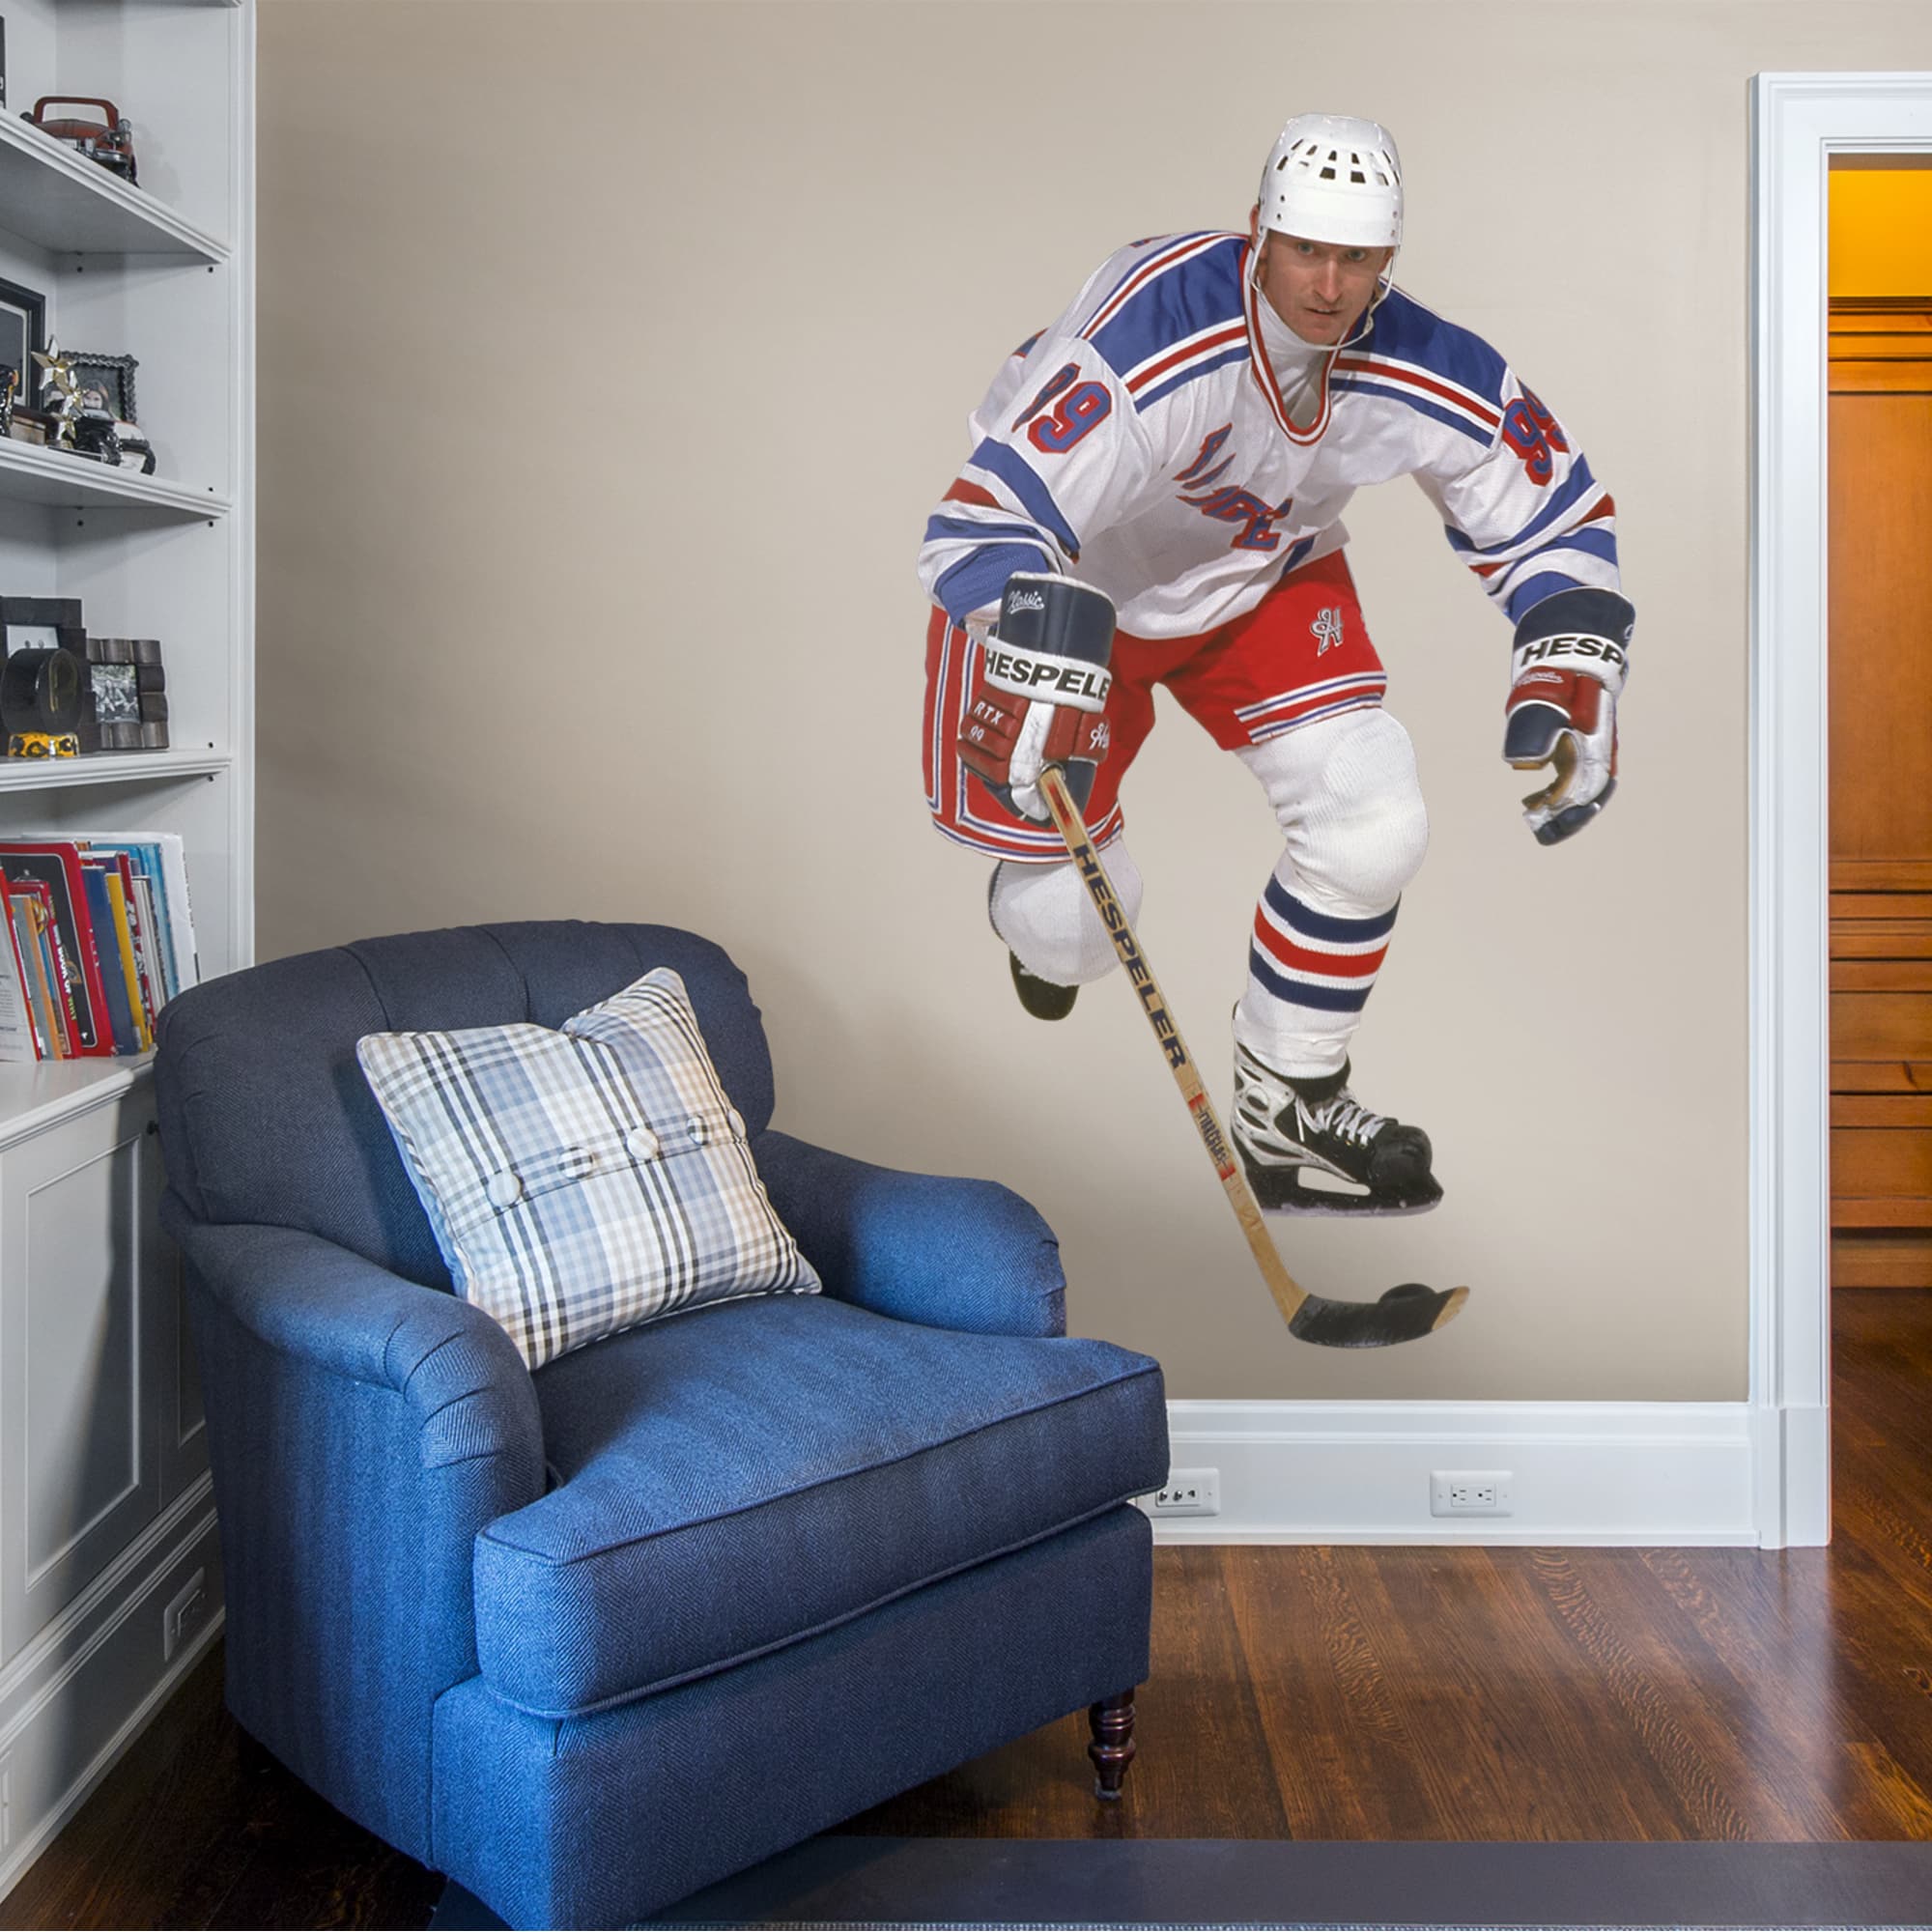 Wayne Gretzky for New York Rangers: Rangers - Officially Licensed NHL Removable Wall Decal Life-Size Athlete + 8 Decals (43"W x